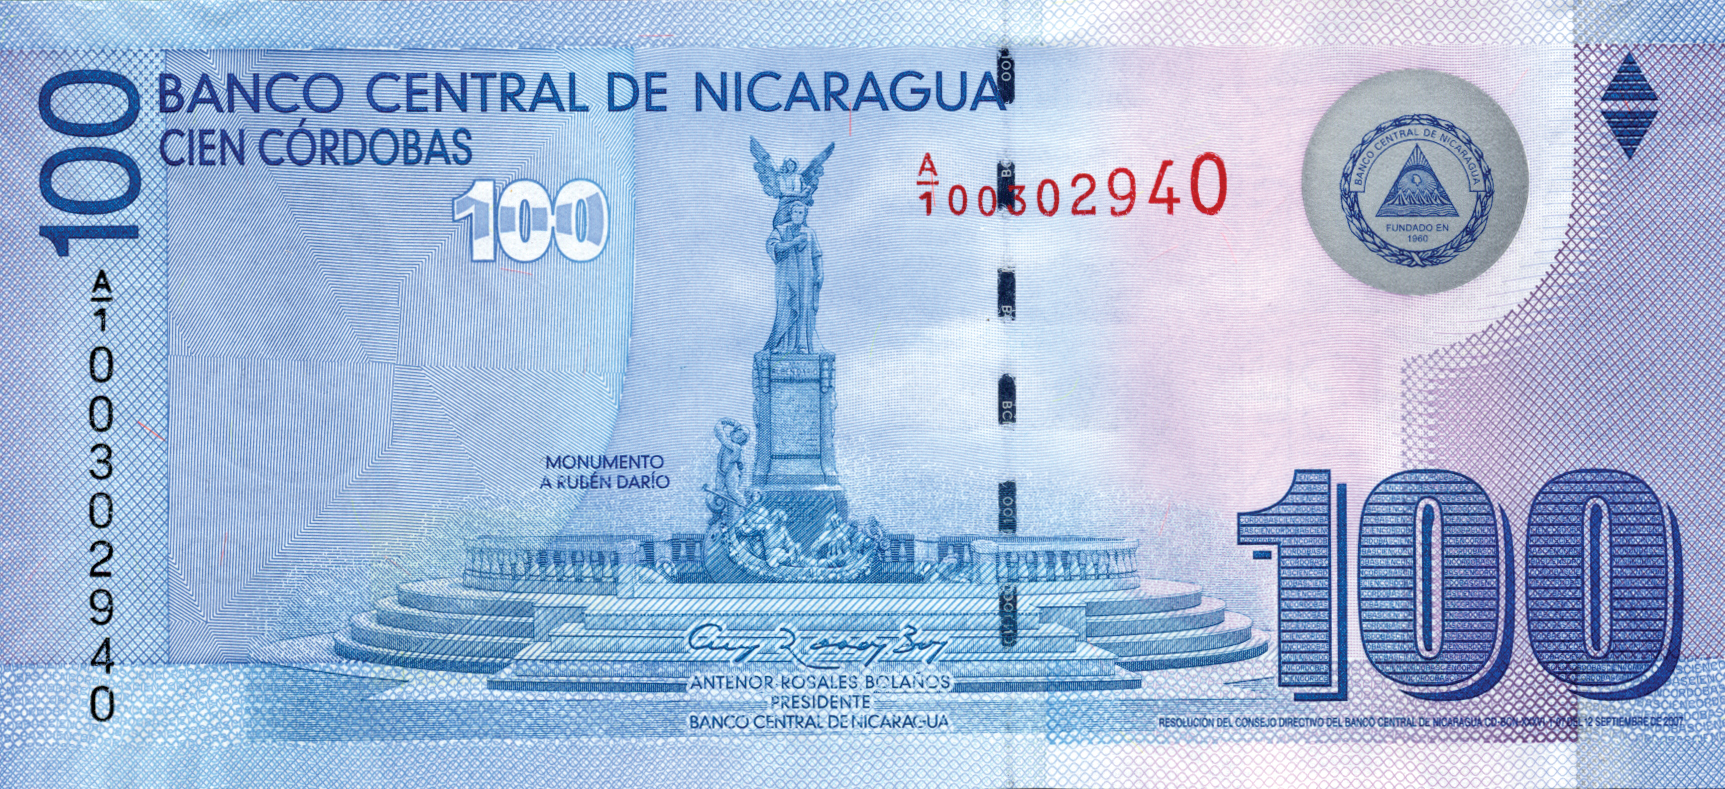 Pack Fresh UNC Details about   2014 NICARAGUA 200 Cordobas P-213a Stunning Polymer Banknote 